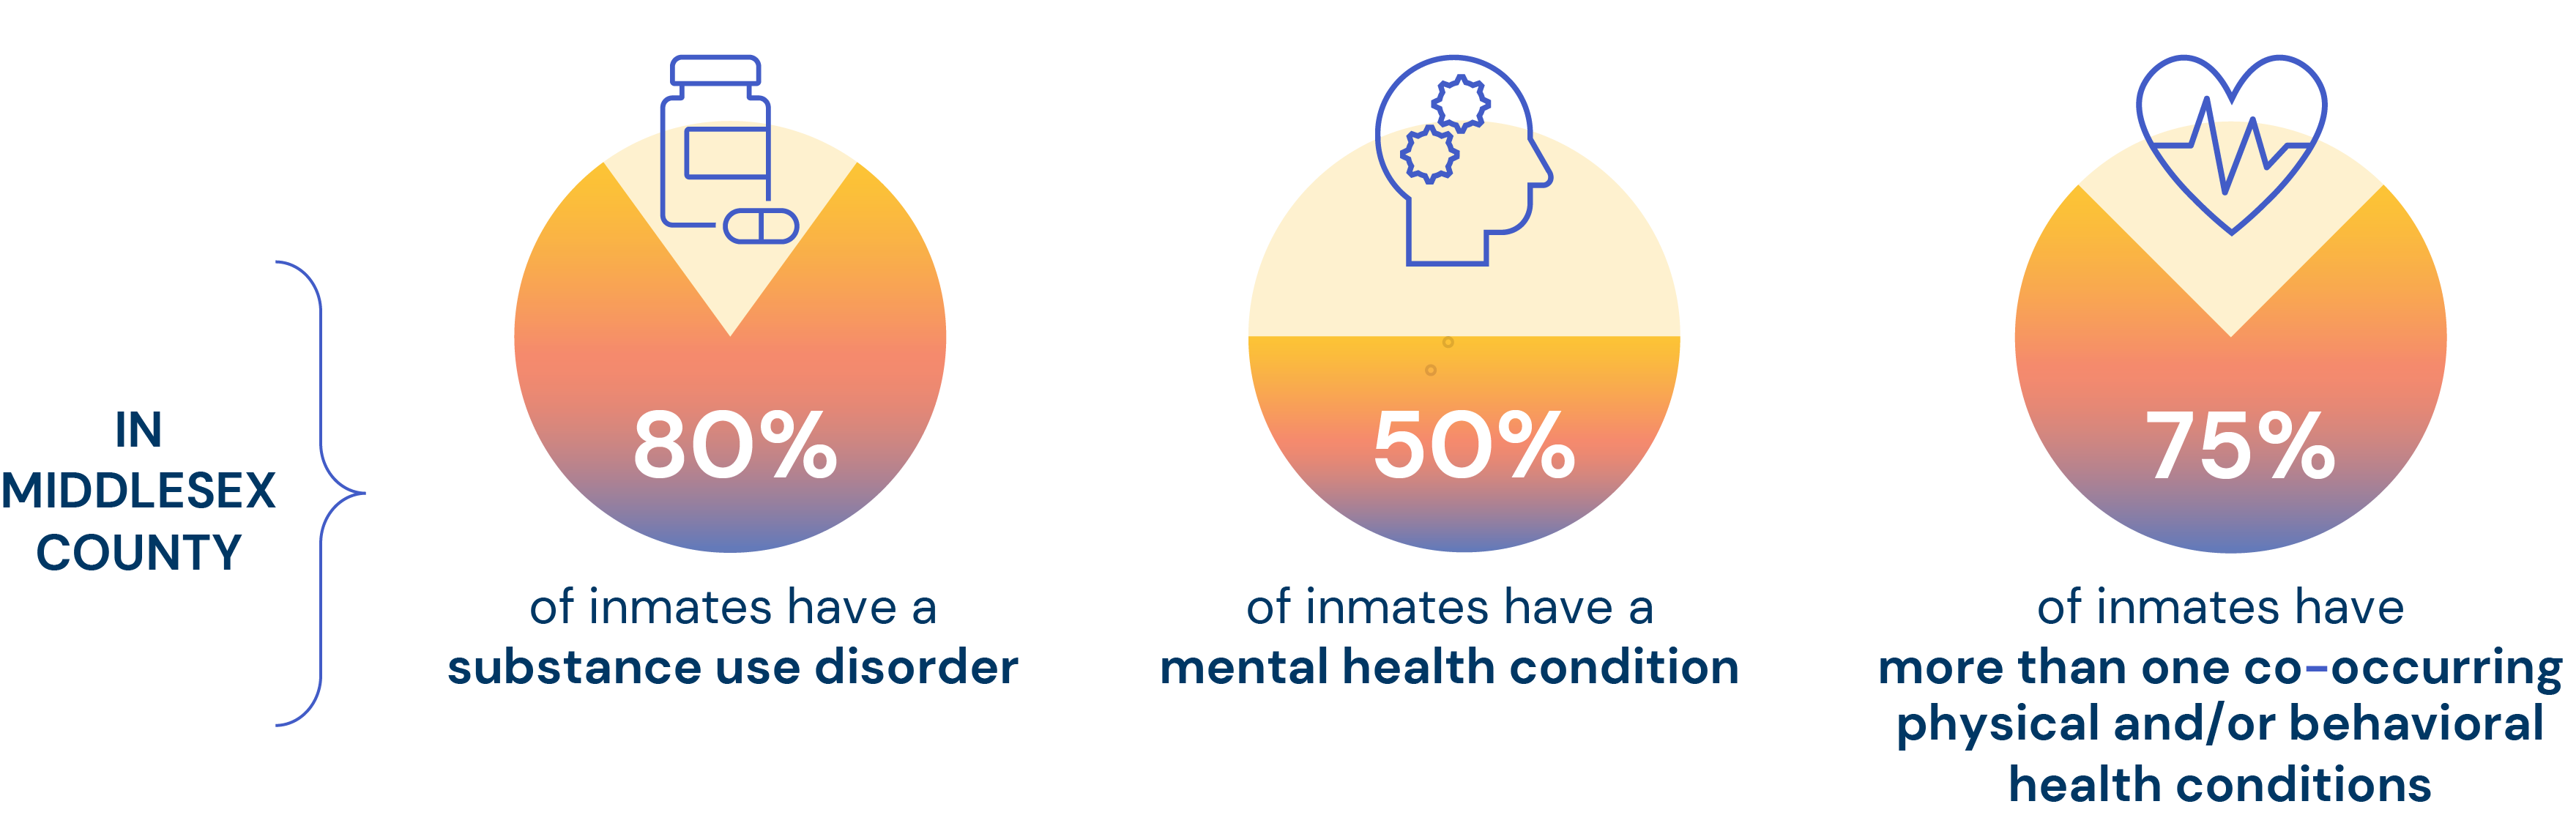 Infographic: In Middlesex county, 80% of inmates have a substance use disorder, 50% have a mental health condition, and 75% have more than one co-occuring physical and/or behavioral health conditions